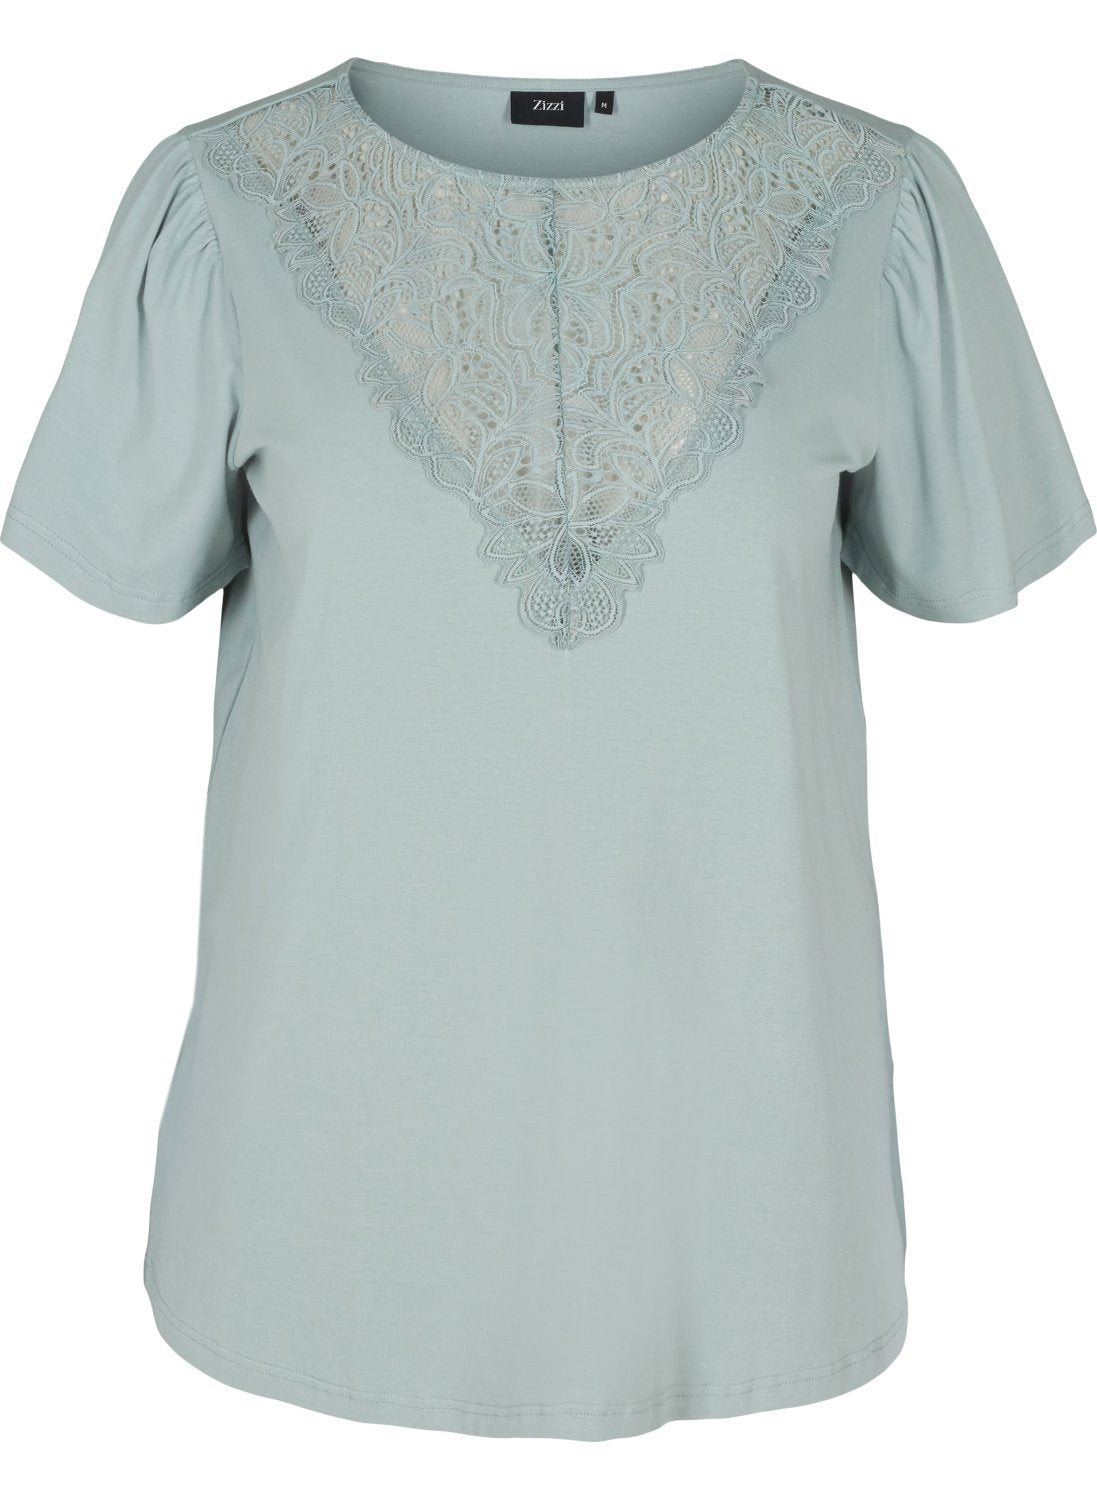 Carly lace Top